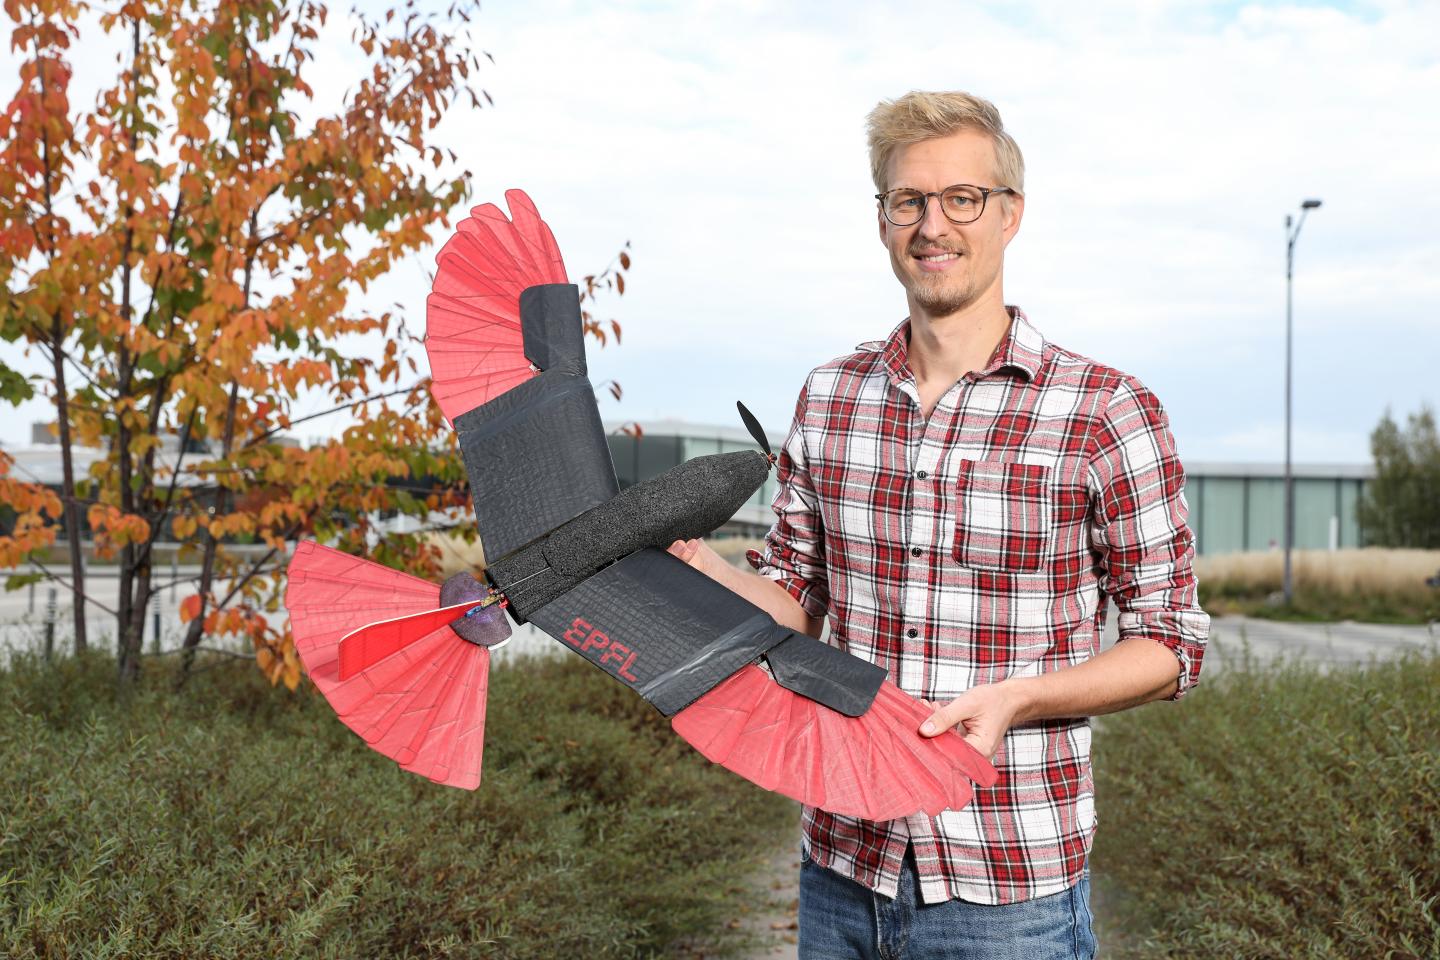 Raptor-inspired drone with morphing wing and tail